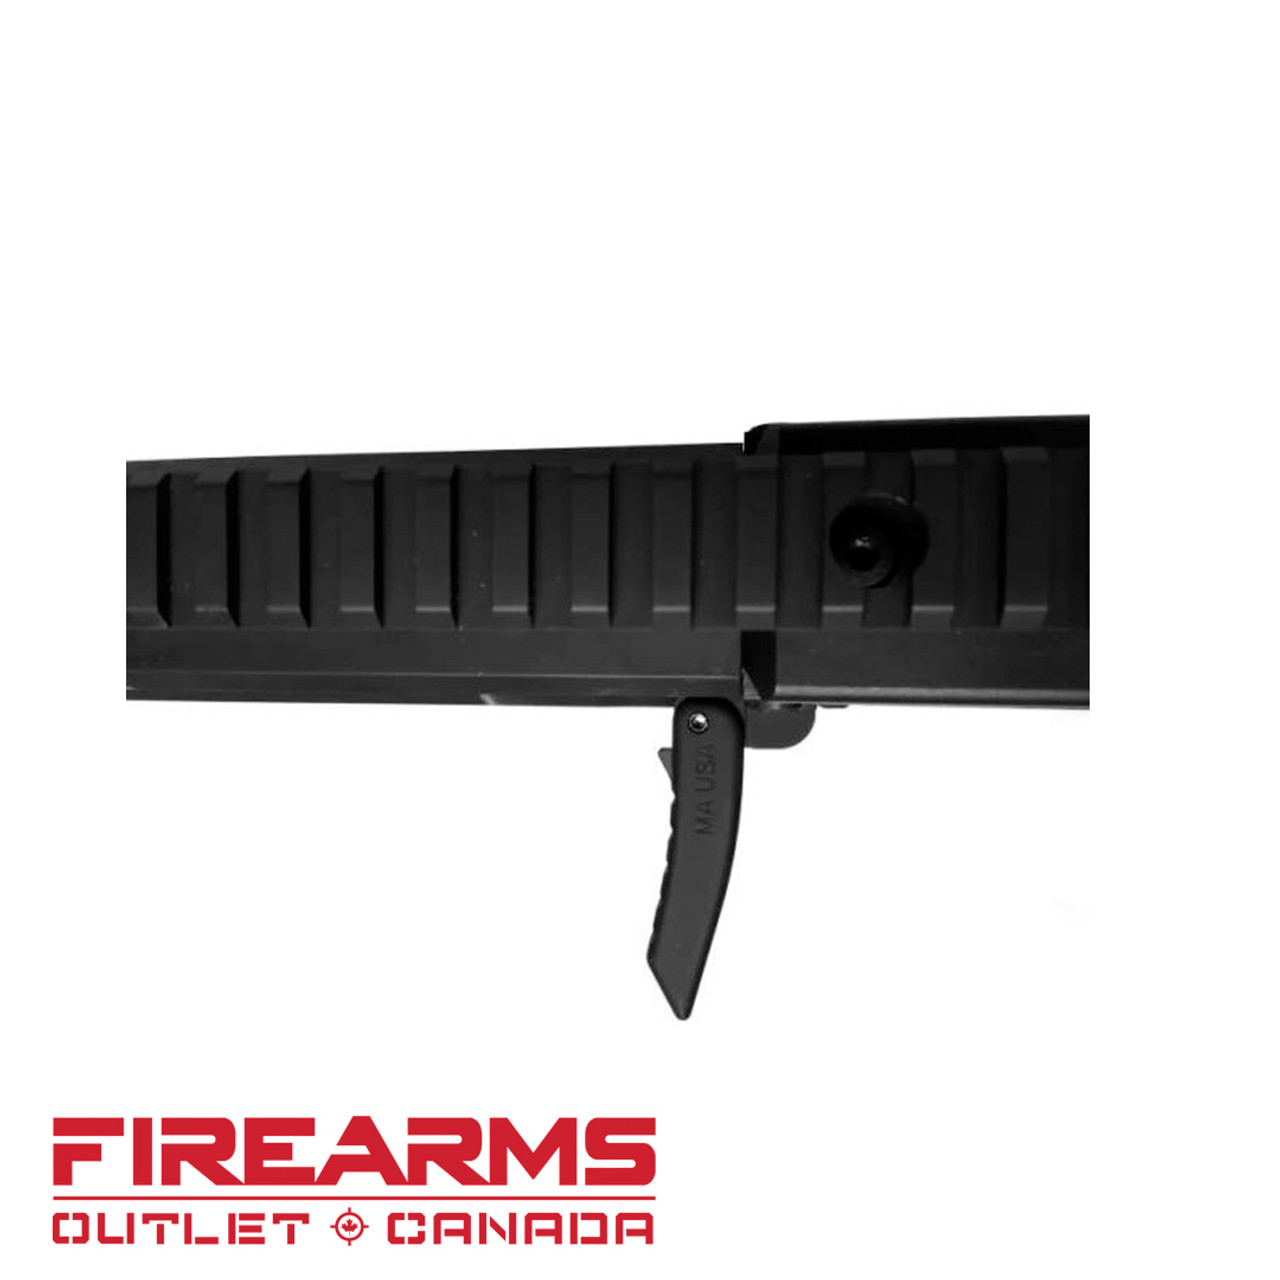 Manticore Arms - X95 Switchback Charging Handle Gen 2 [MA-21950]